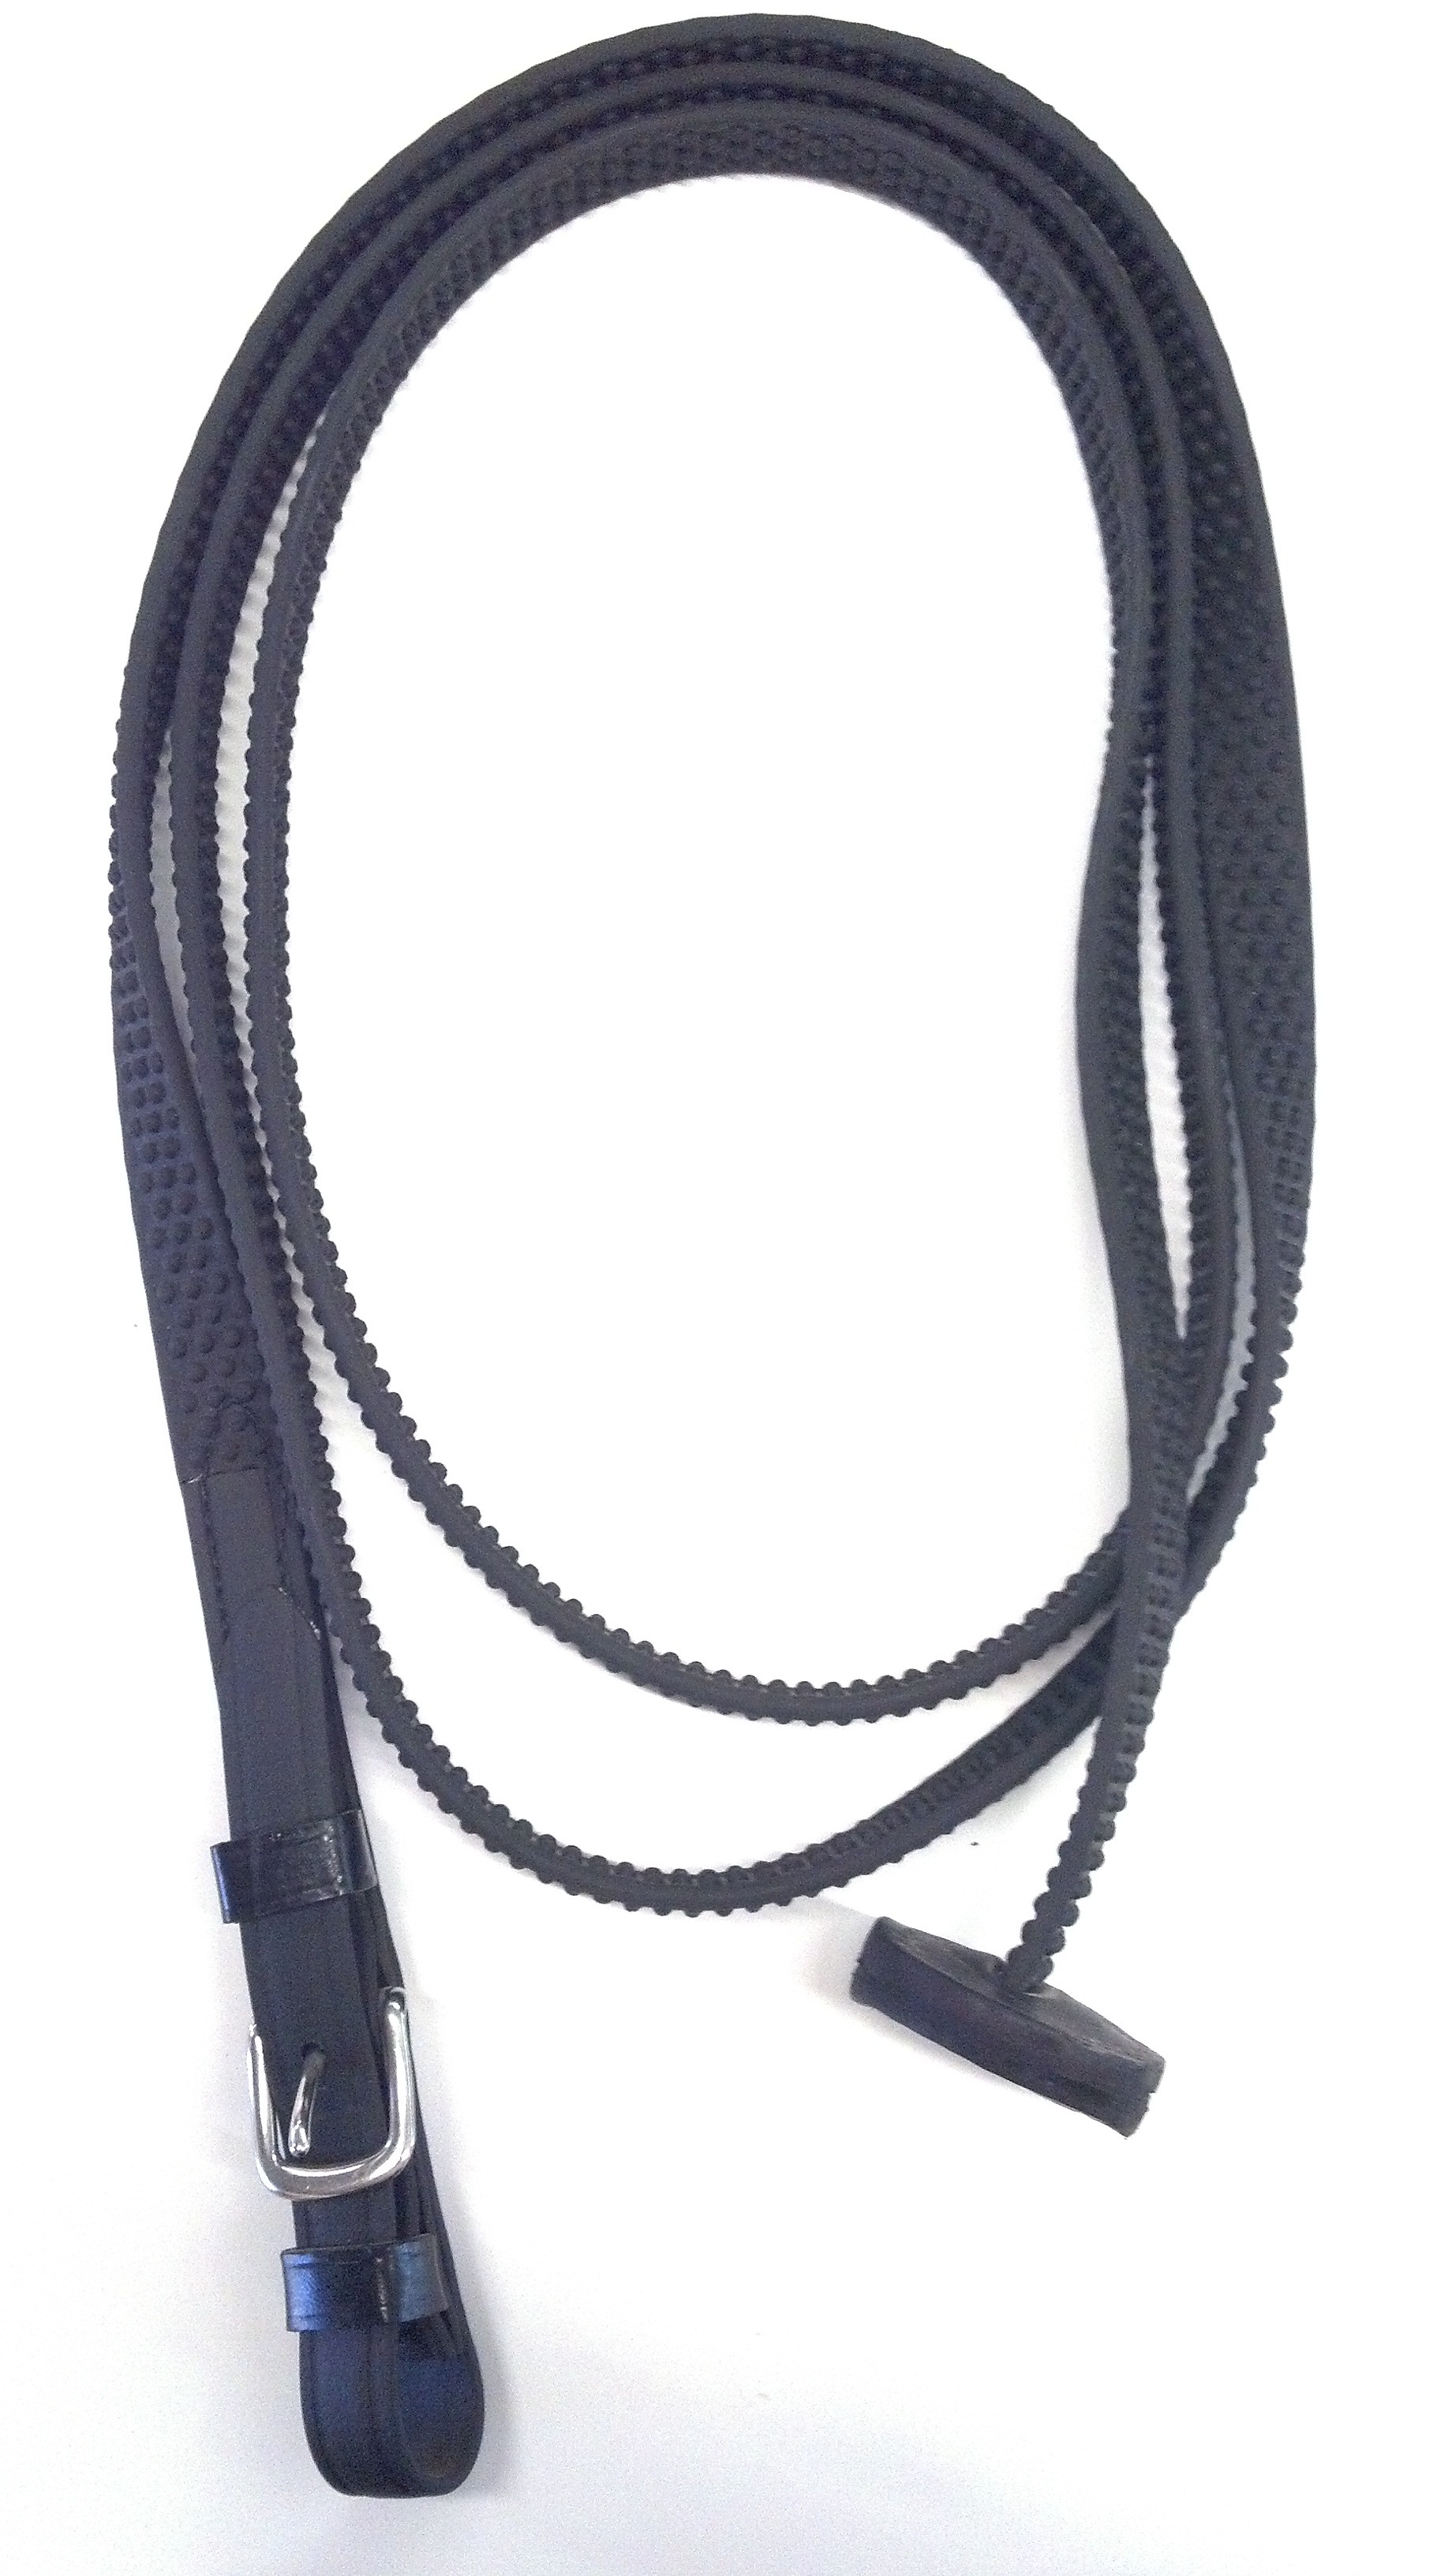 Super Grip Schooling & Show Lead 10' Stainless Steel on Buckle